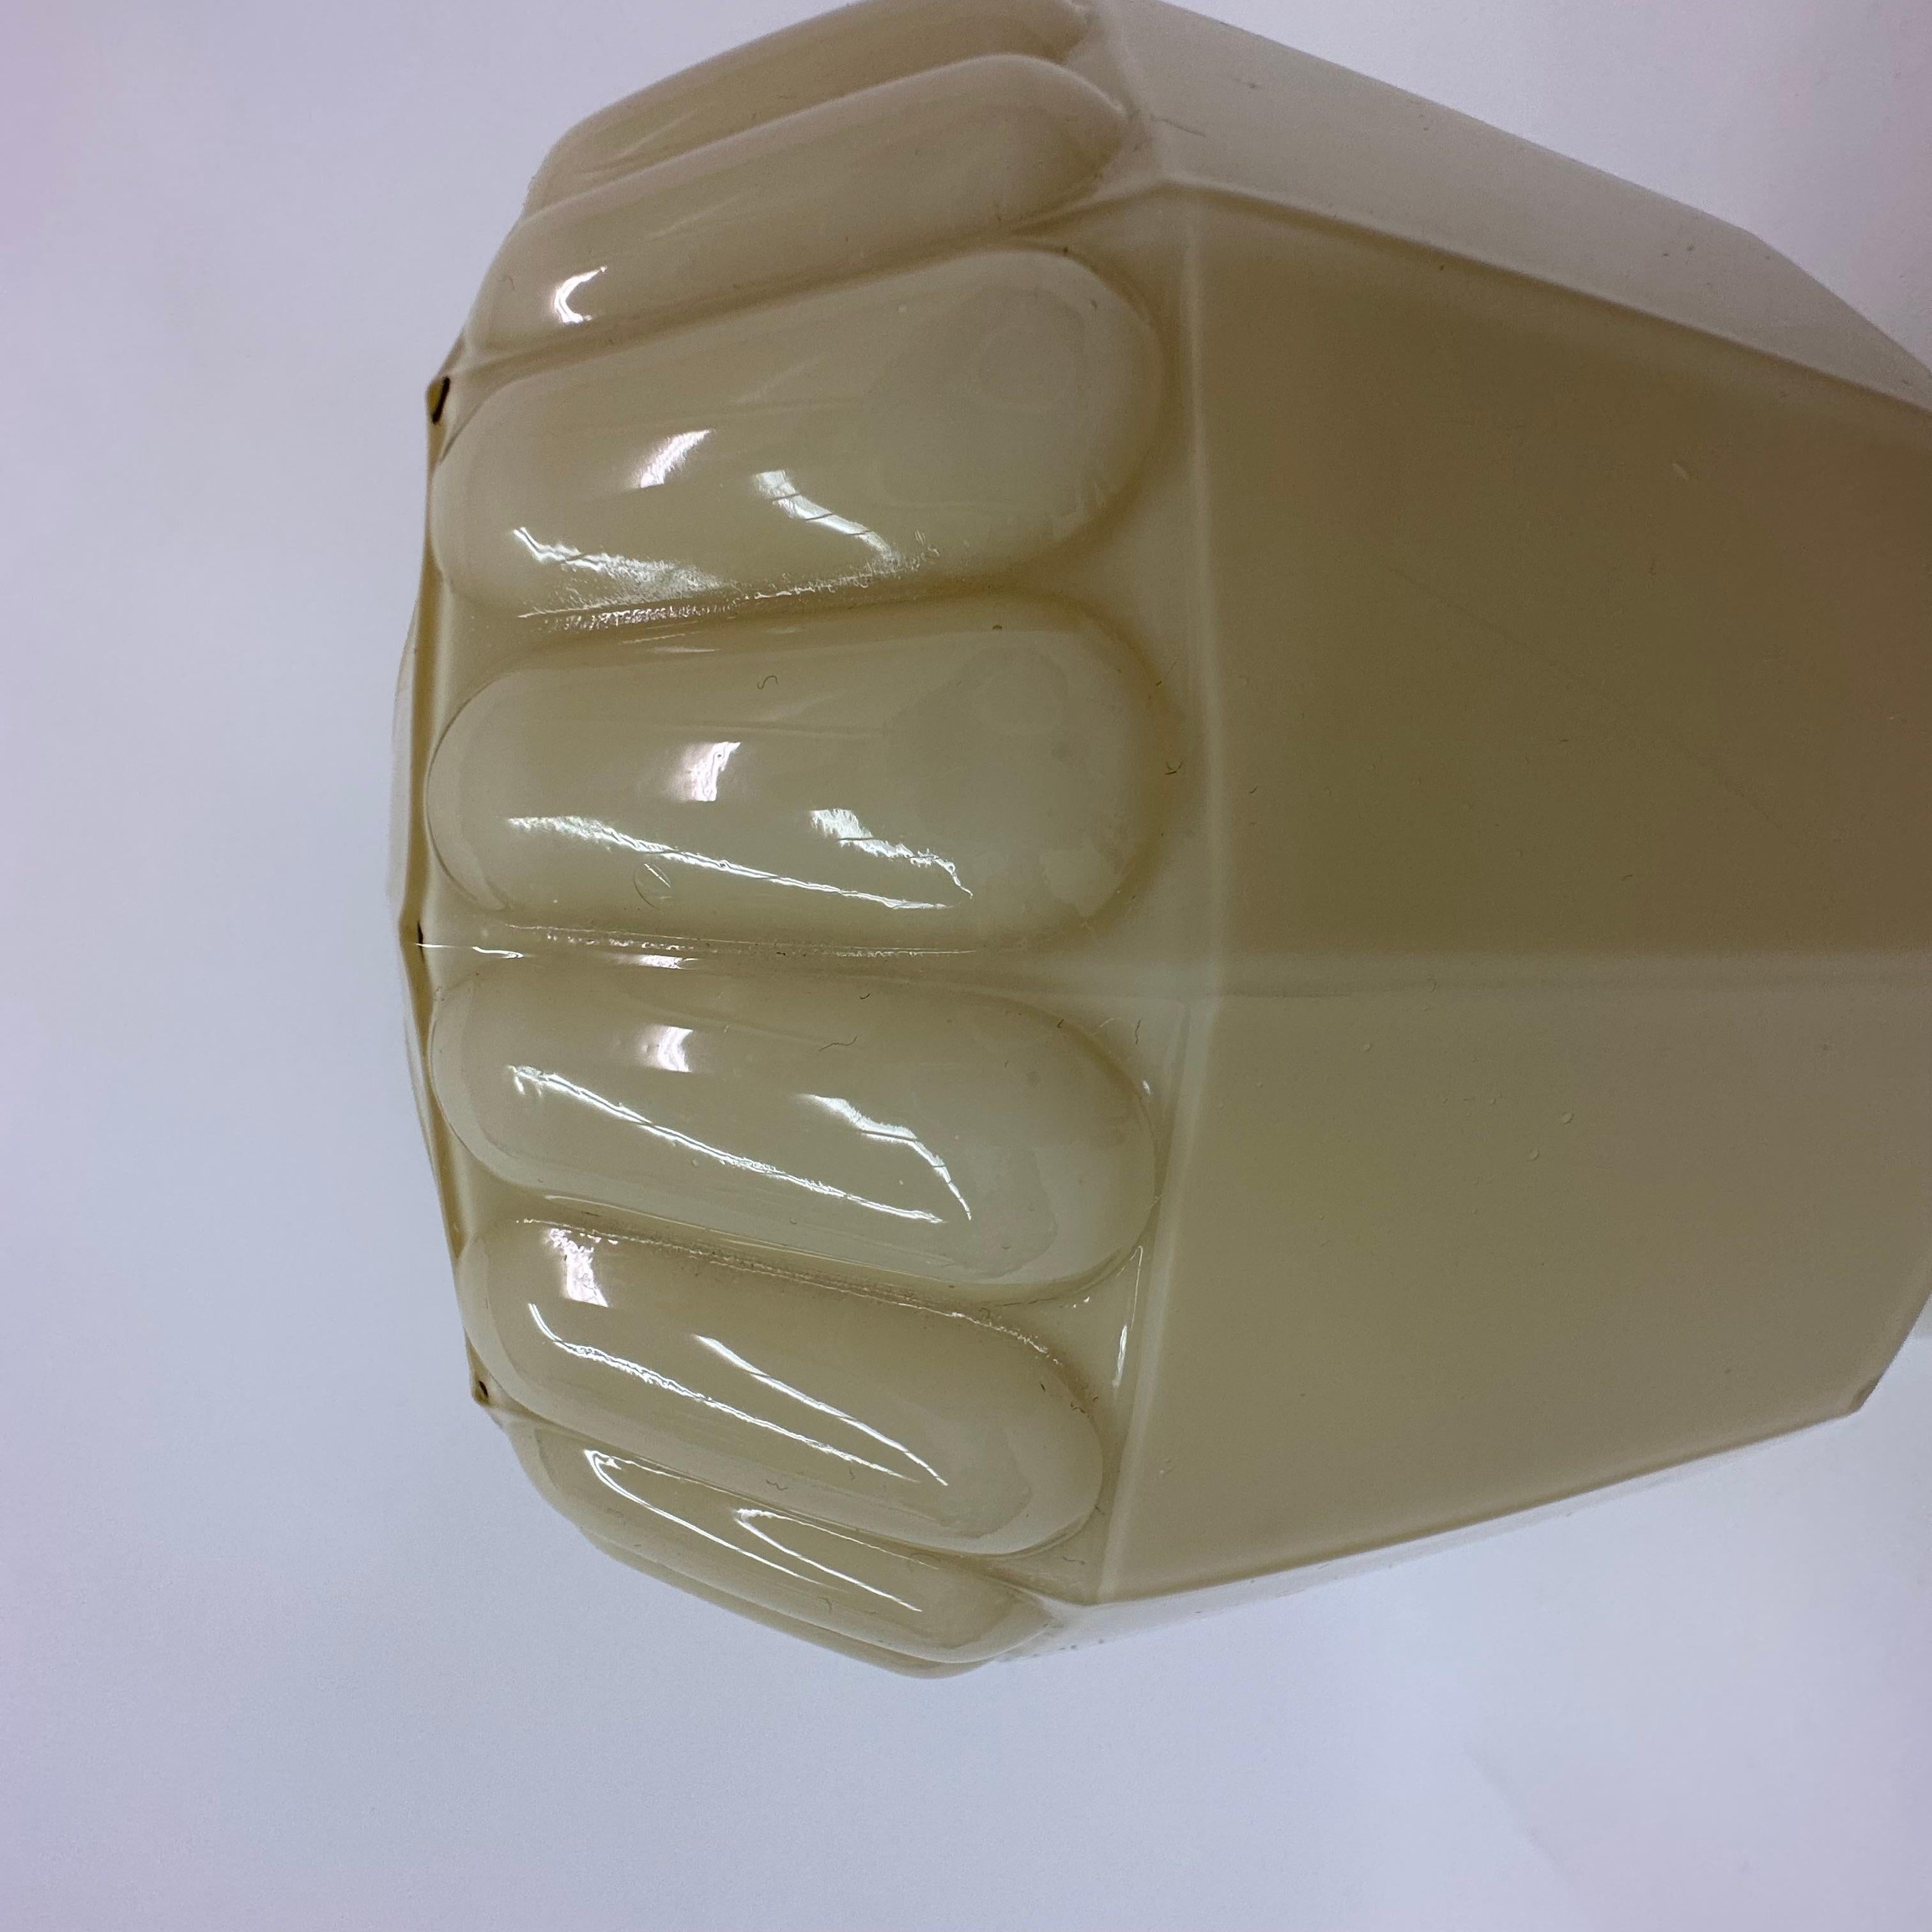 Thabur ceiling lamp Art deco 1930’s In Good Condition For Sale In Delft, NL